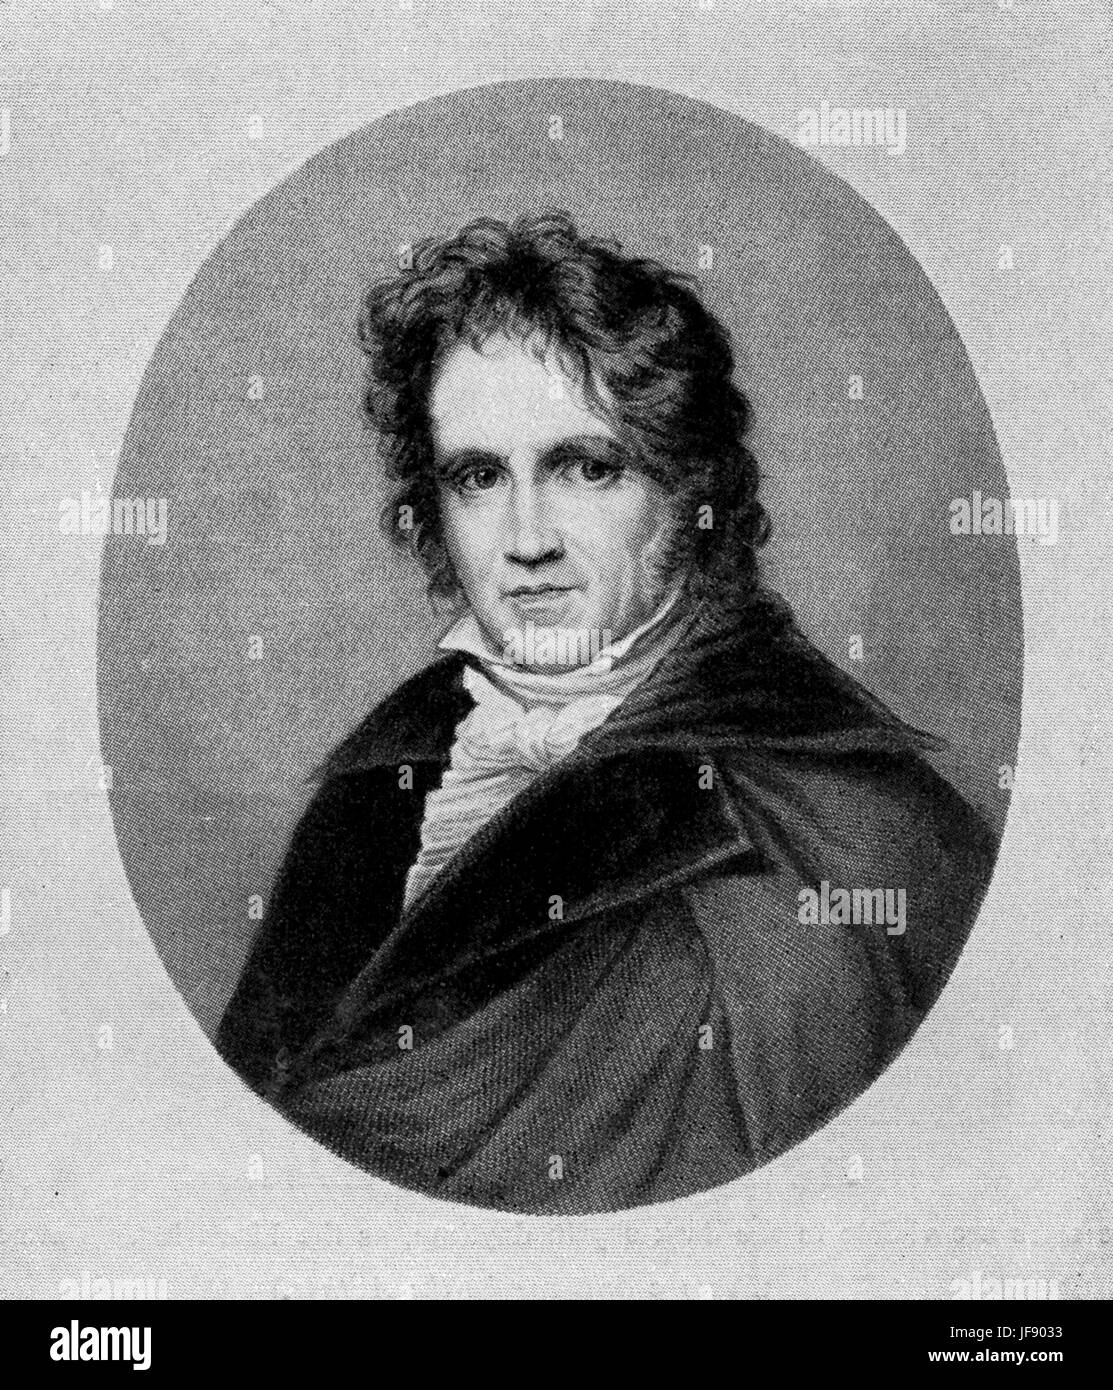 Friedrich Wilhelm Bessel.  German astronomer, mathematician, physicist and geodesist. He was the first astronomer who determined reliable values for the distance from the sun to another star by the method of parallax. FWB:  22 July 1784 – 17 March 1846 Stock Photo